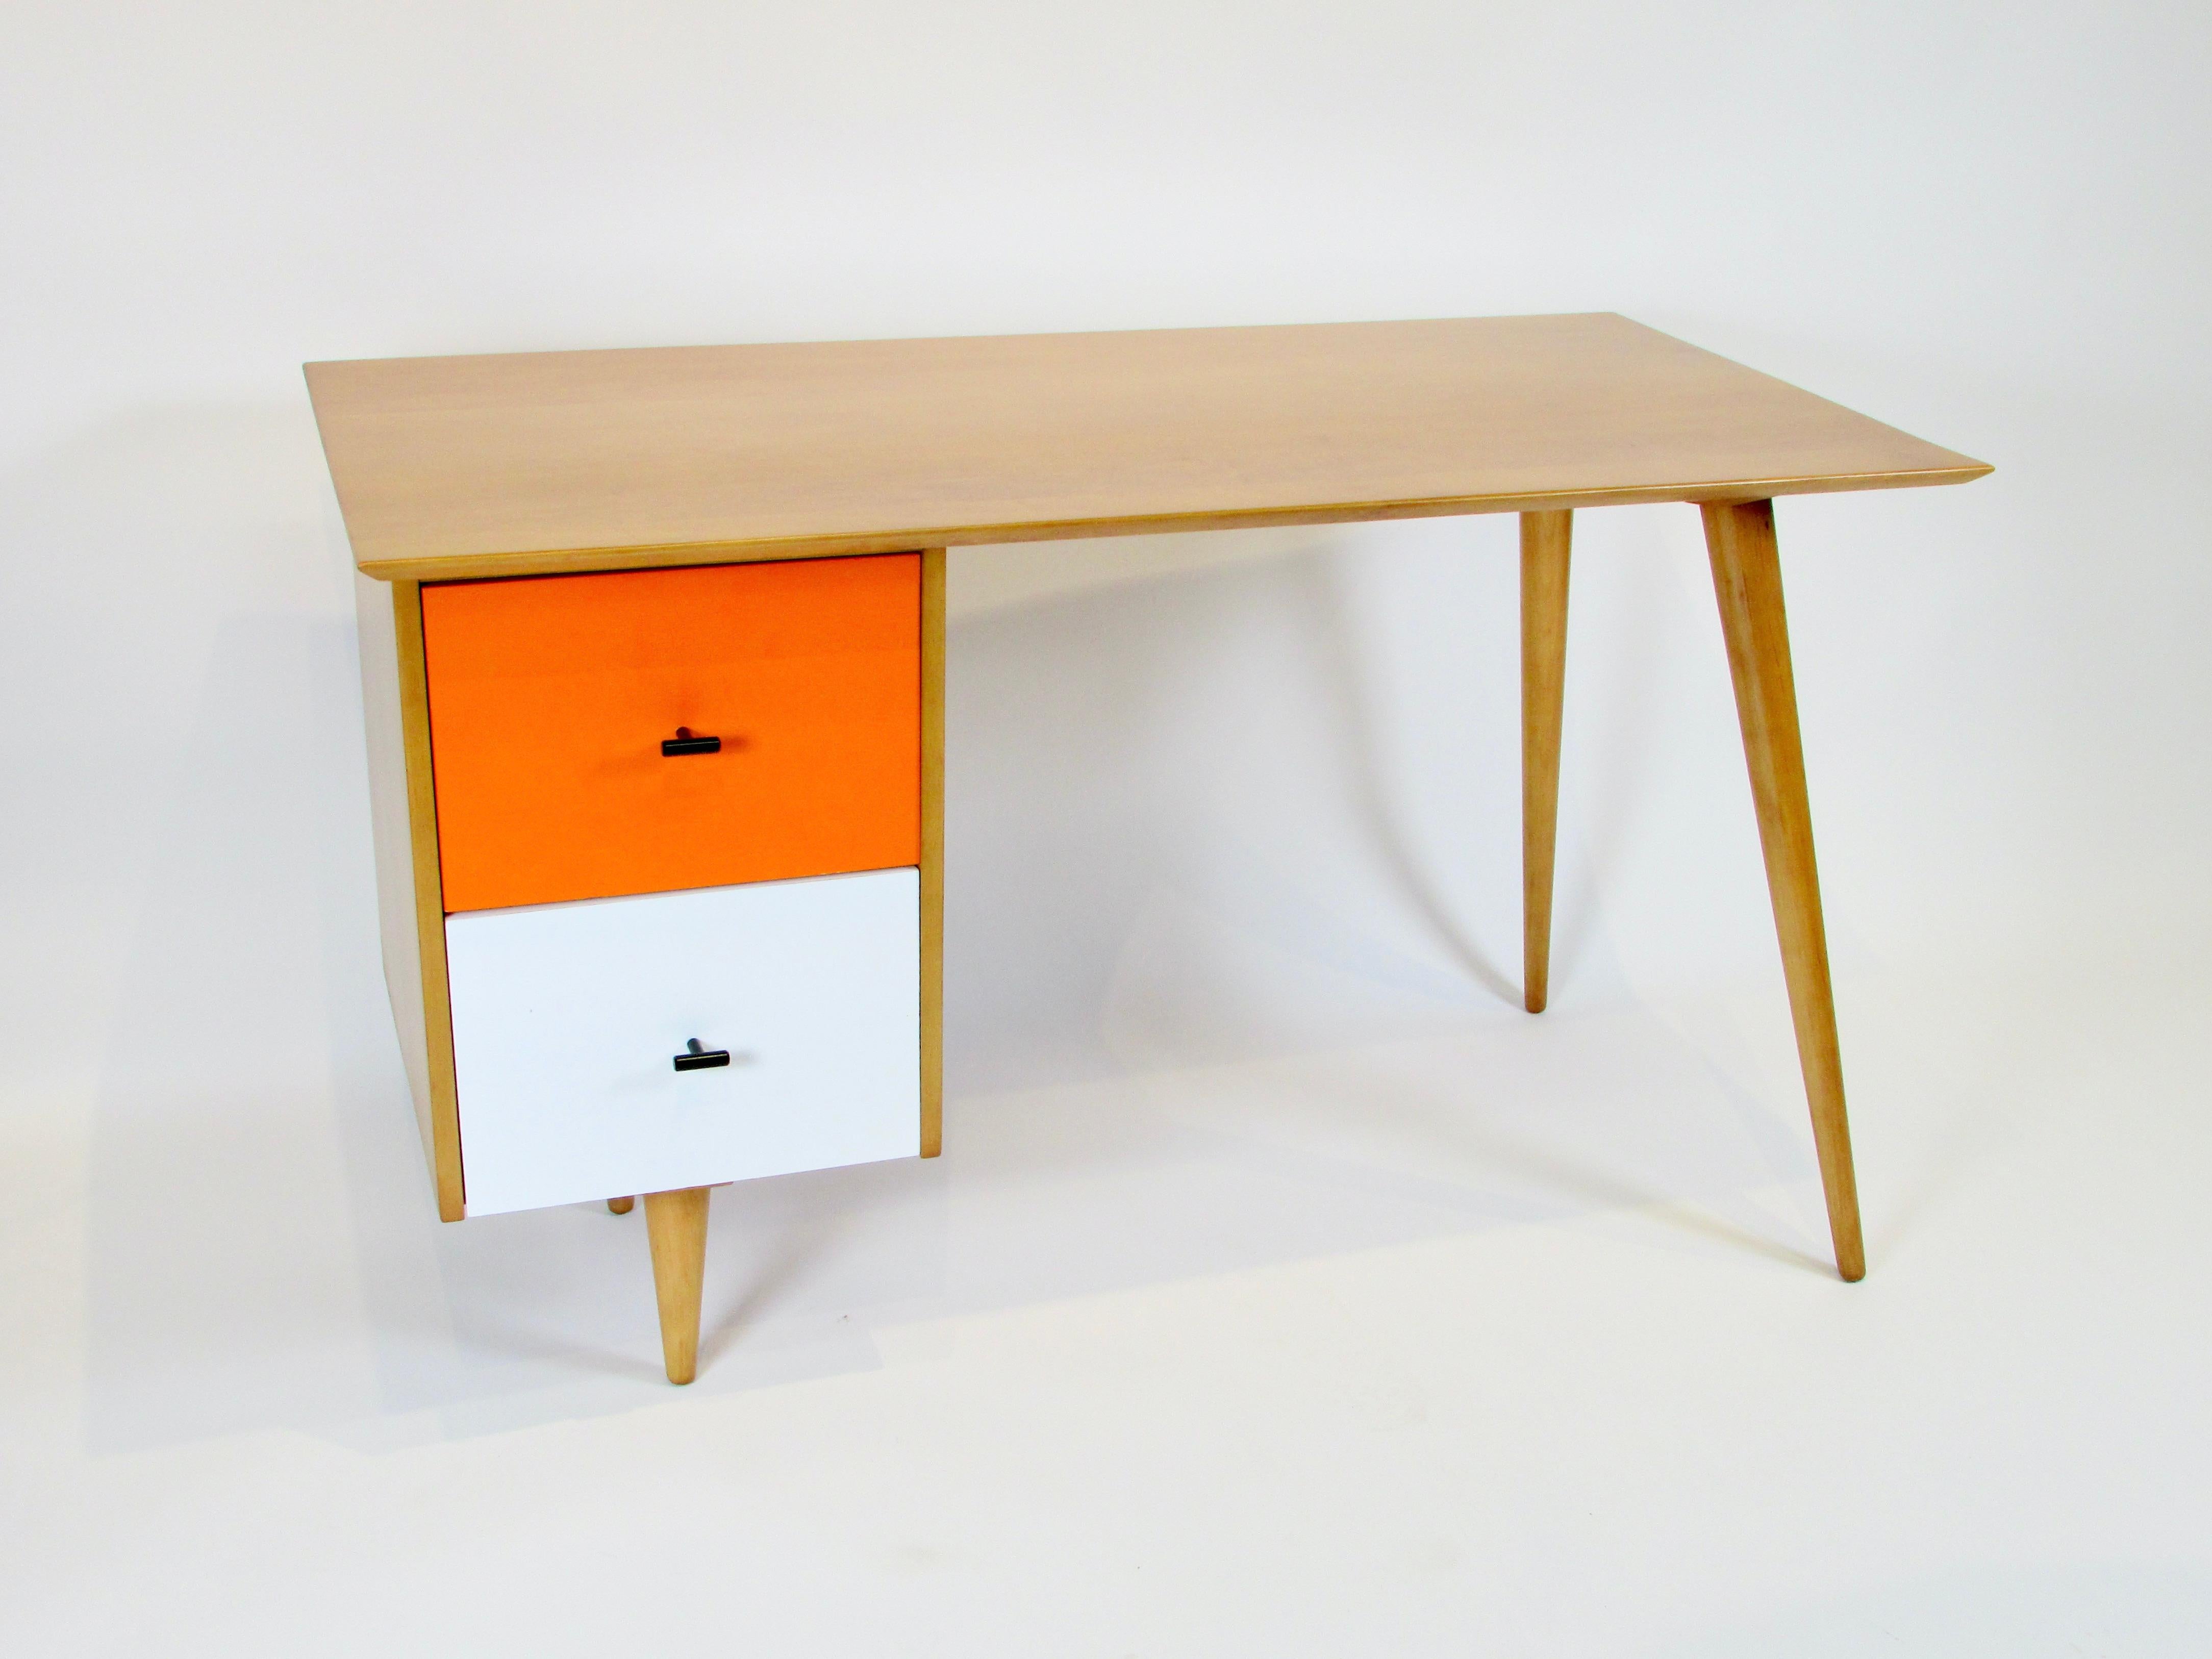 Paul McCobb designed desk for Winchendon Furniture in Mass. Part of the large Planner group collection Introduced in the early 1950s. Planner group being a collection of modular furniture that would work together in different configurations. Chests,